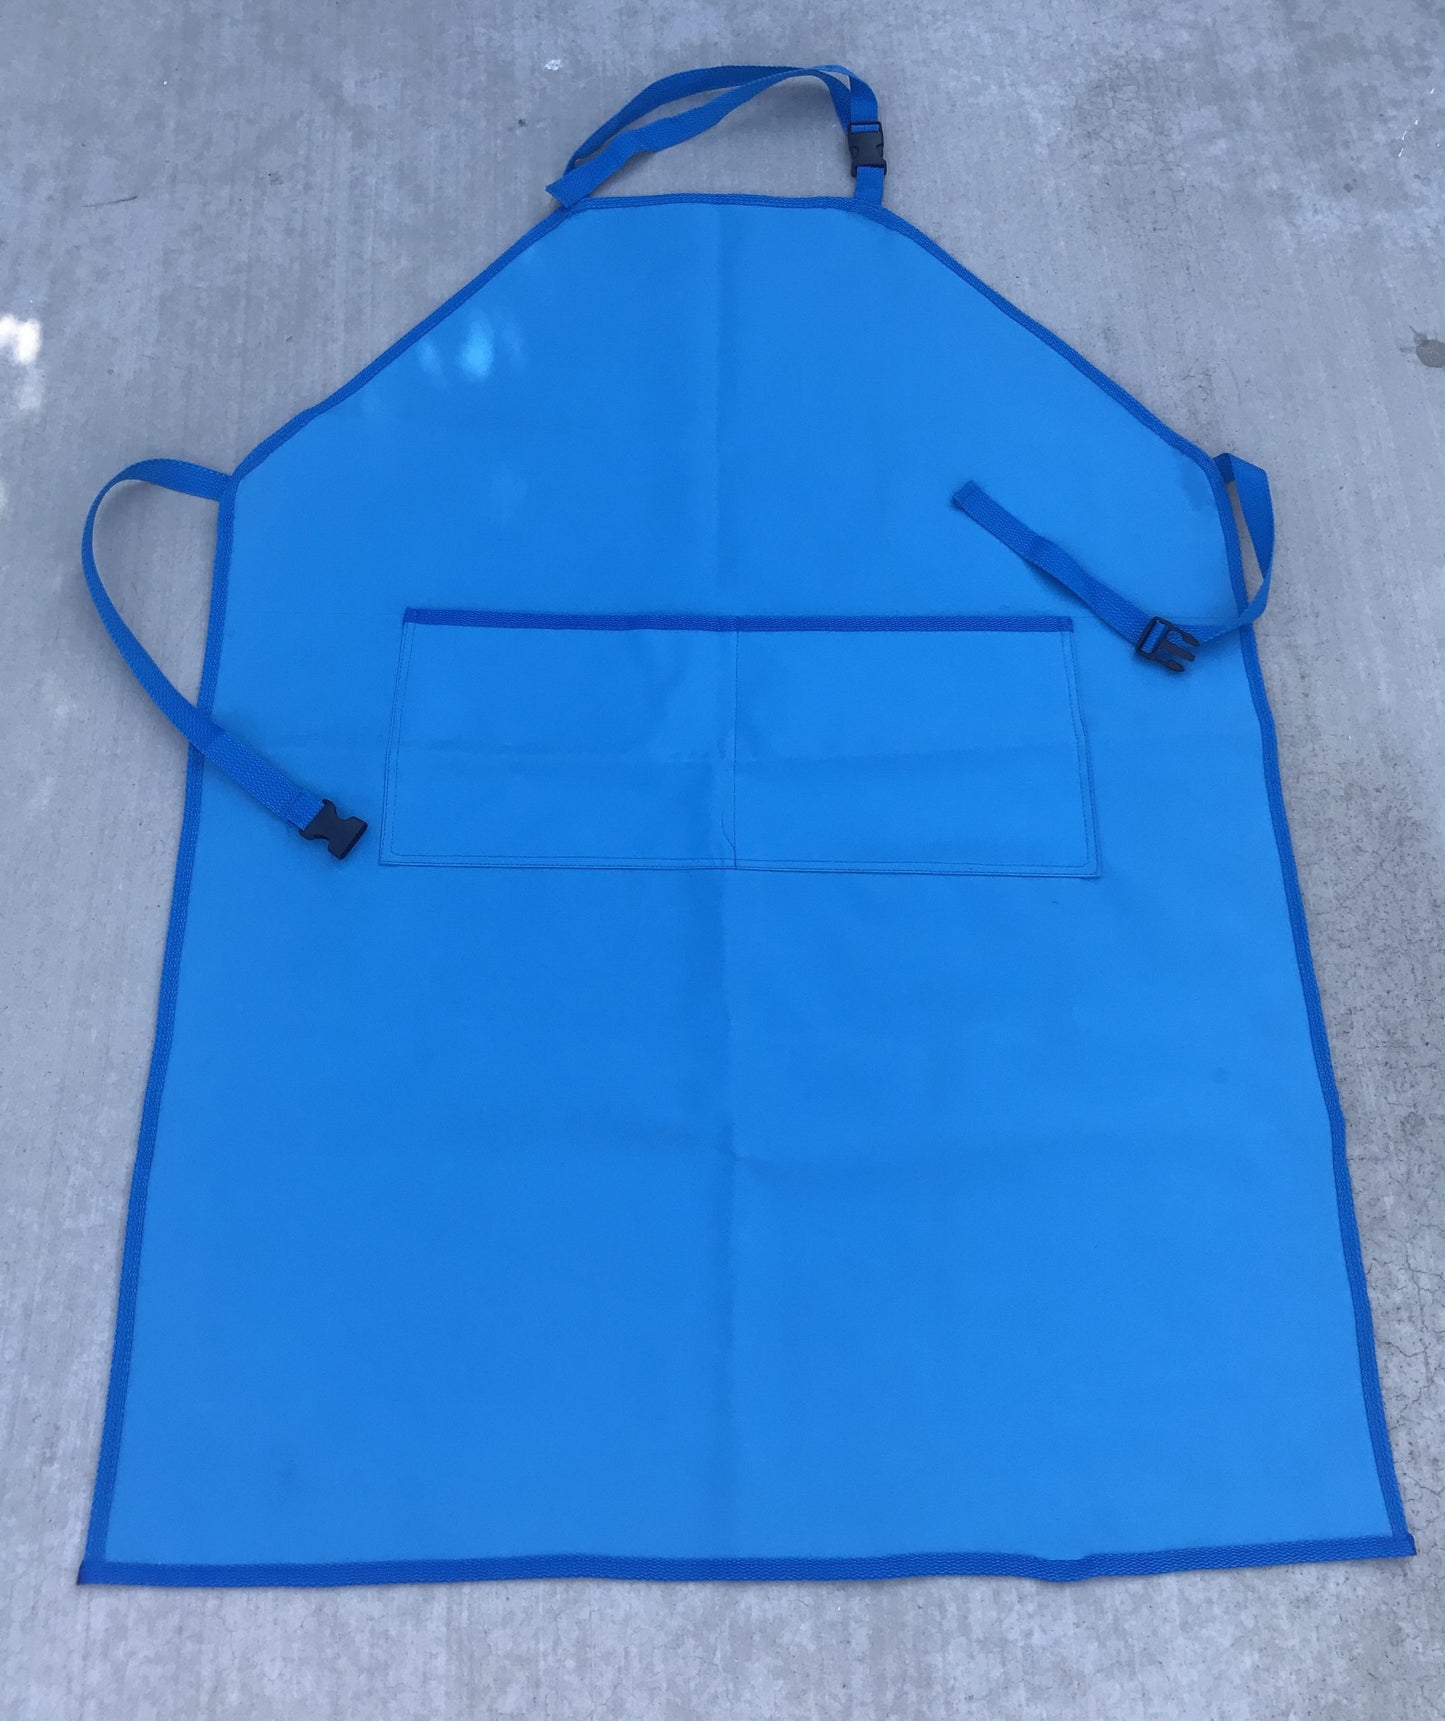 Clear Pool Filter Apron - Bright Blue